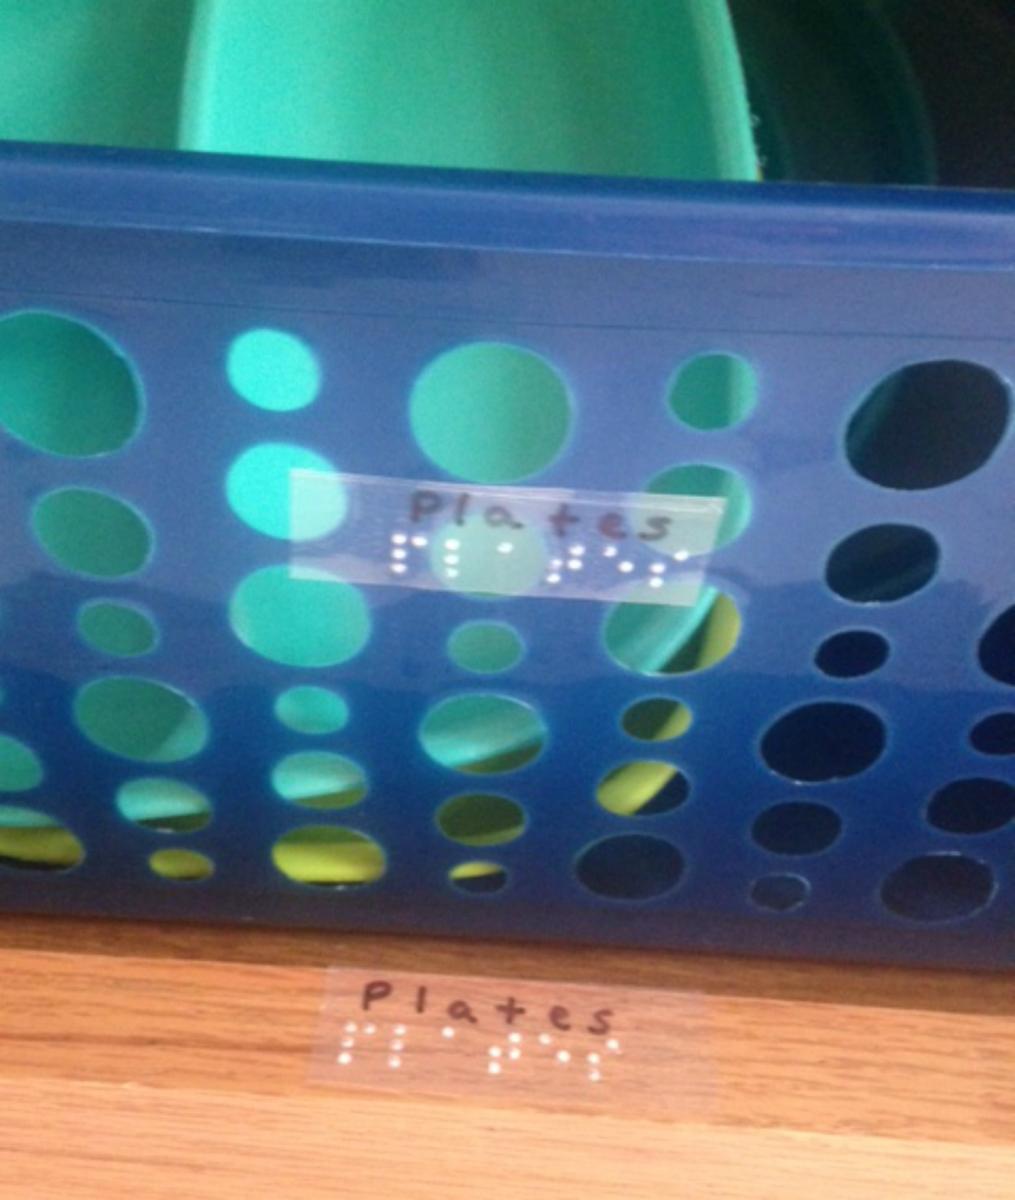 Plates with braille label